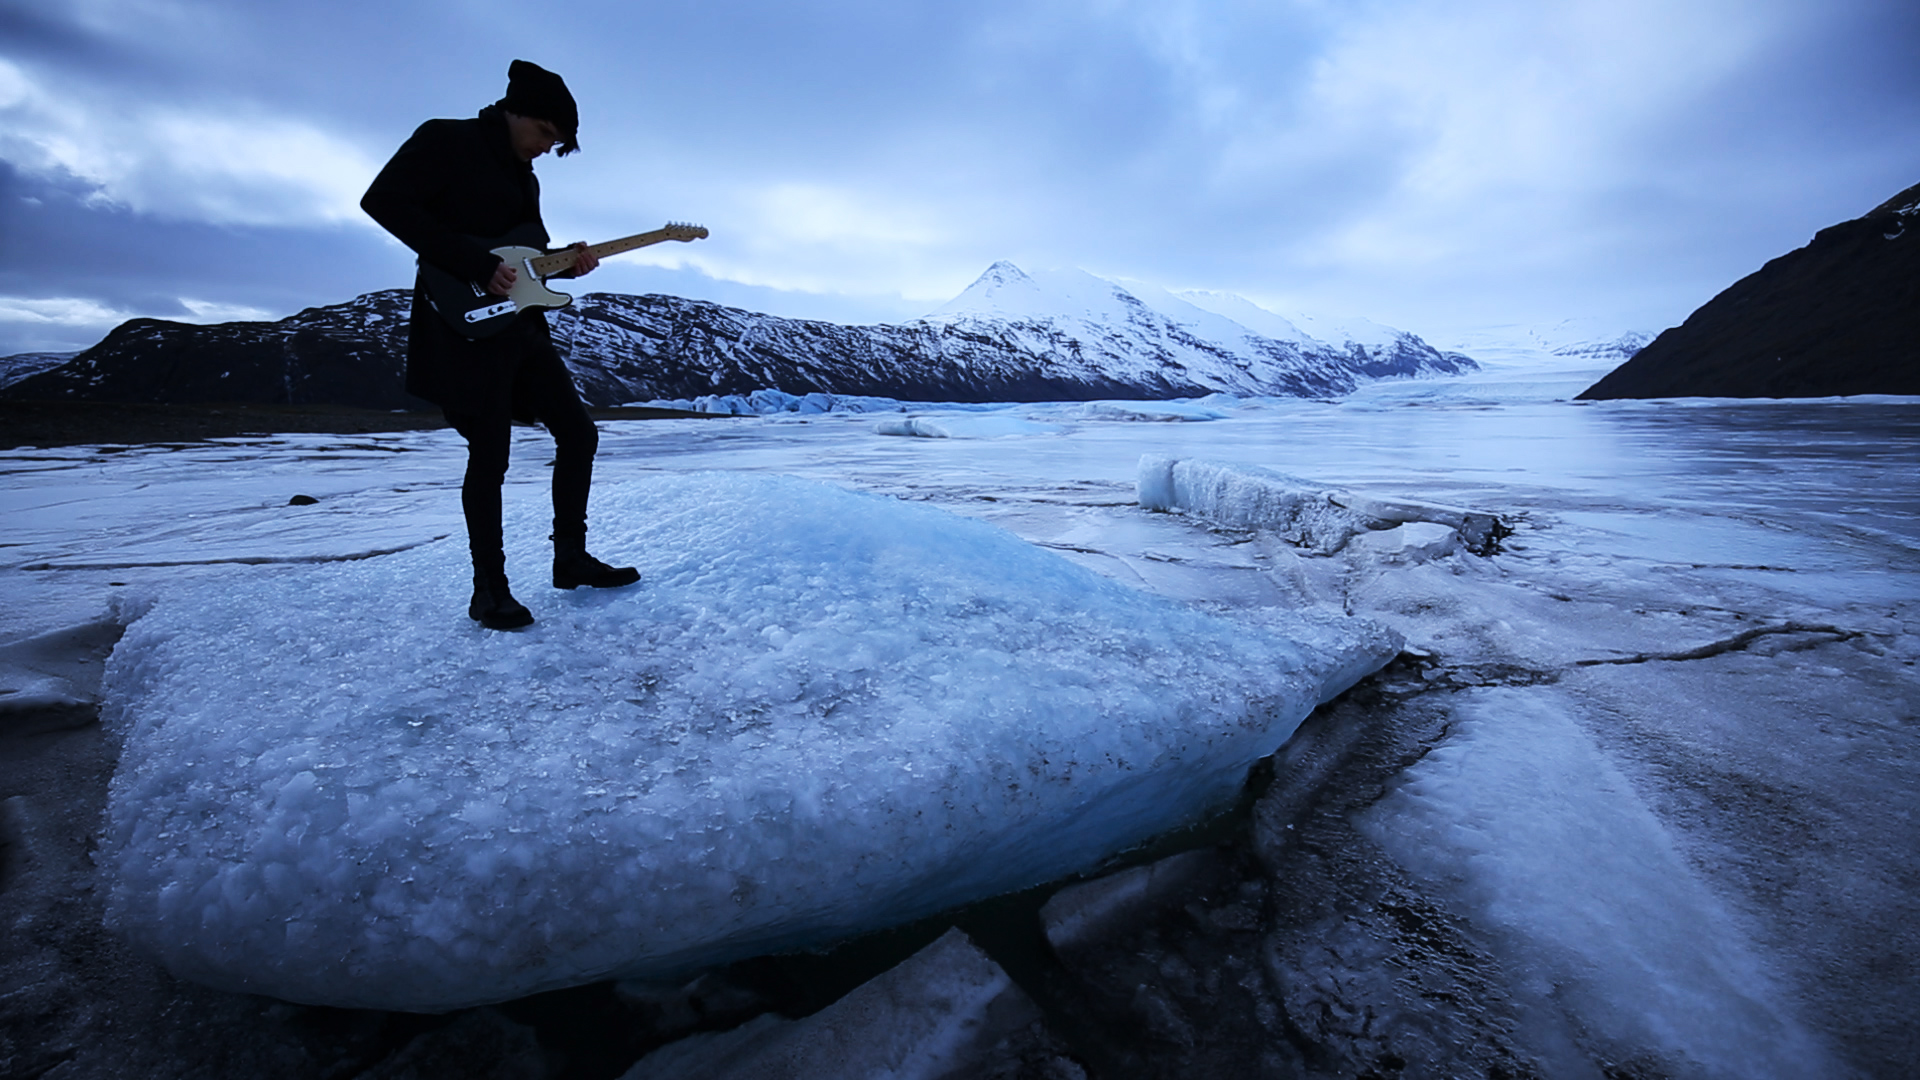 Adriano Miccoli filming in Iceland for their official Music video Angels and Demons